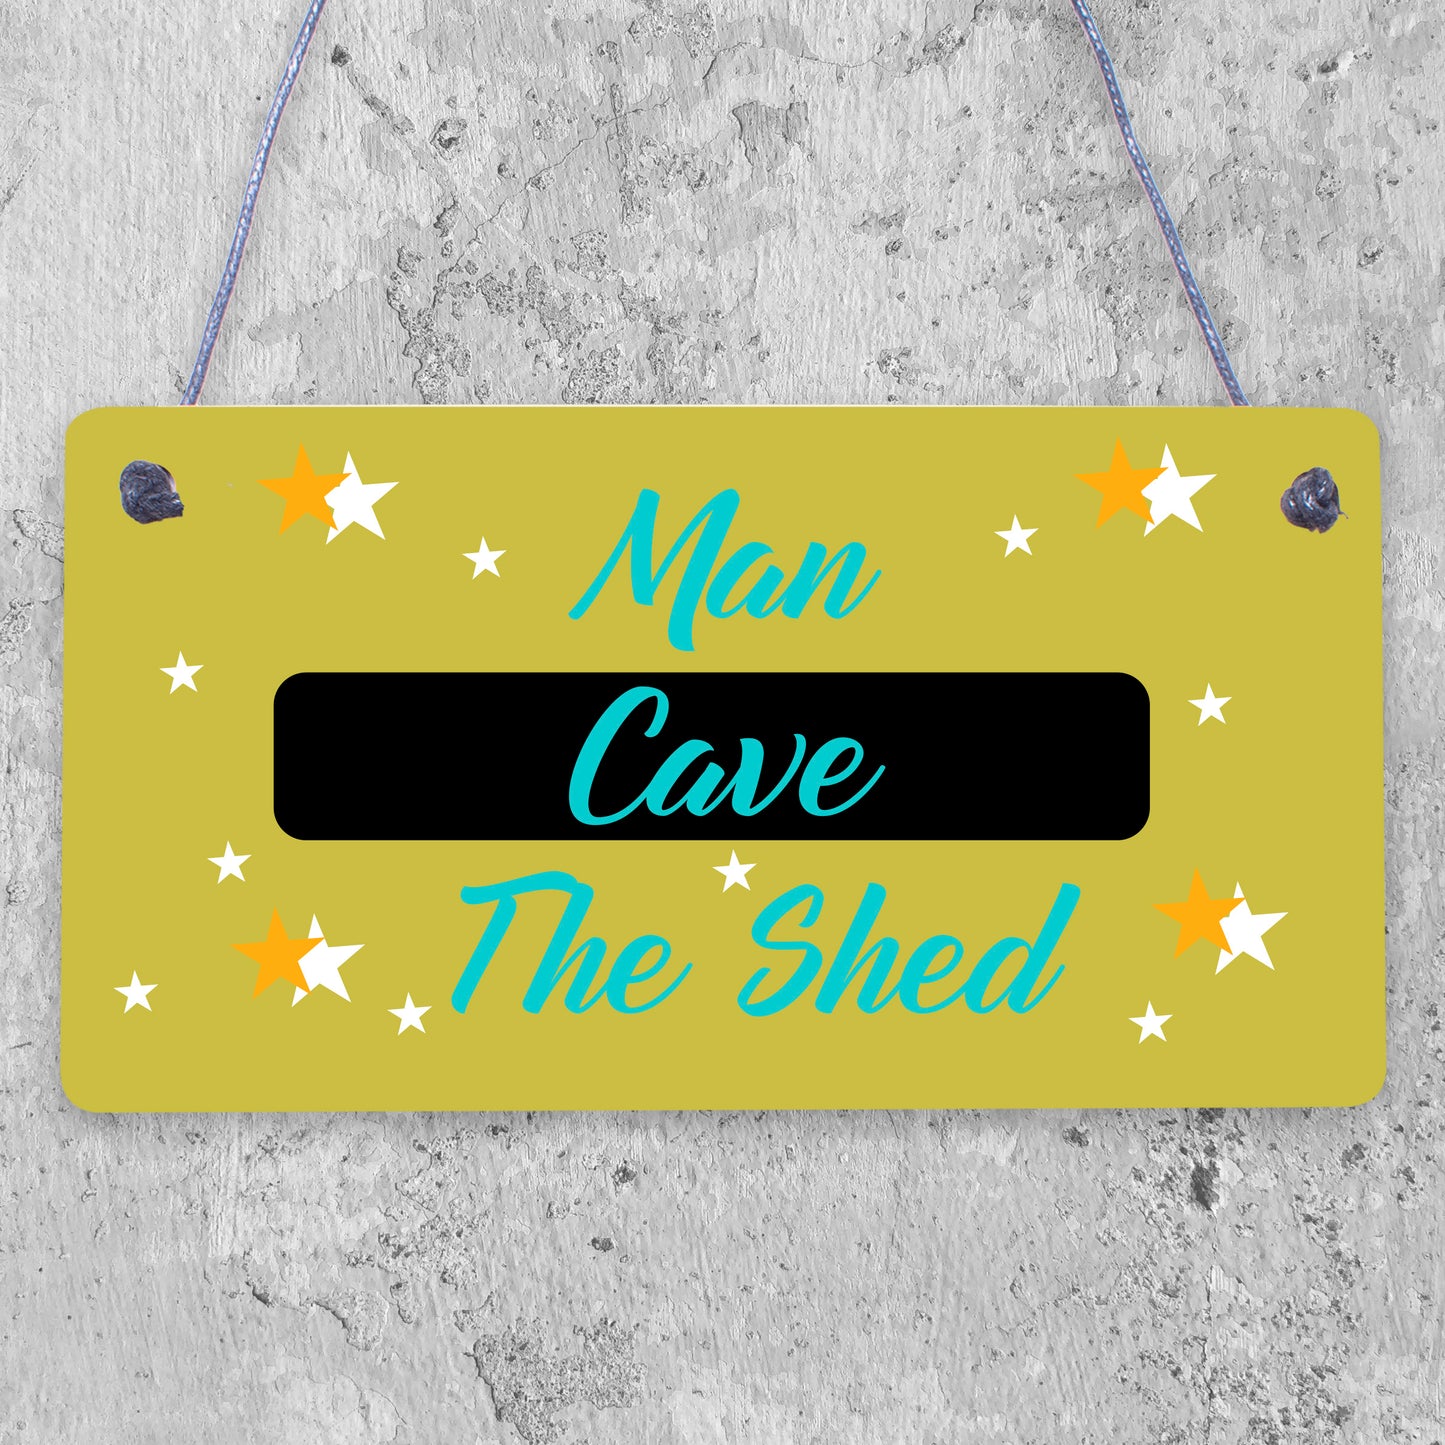 Man Cave AKA The Shed Novelty Wooden Hanging Plaque Sign Husband Boyfriend Gift